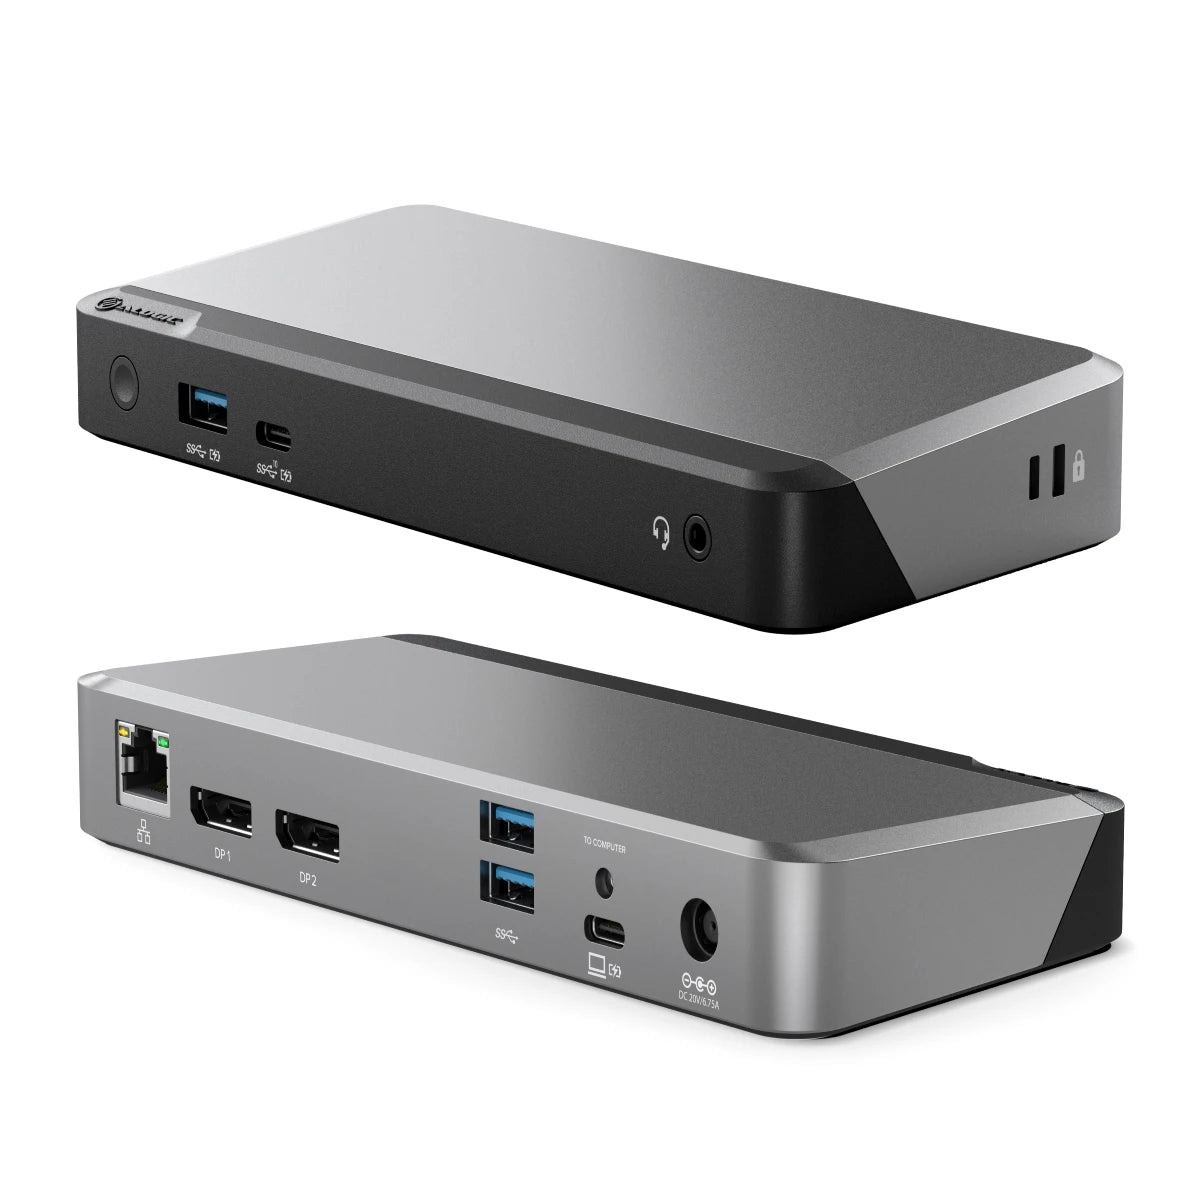 MX2 USB-C Dual Display DP Alt. Mode Docking Station – With 65W Power Delivery